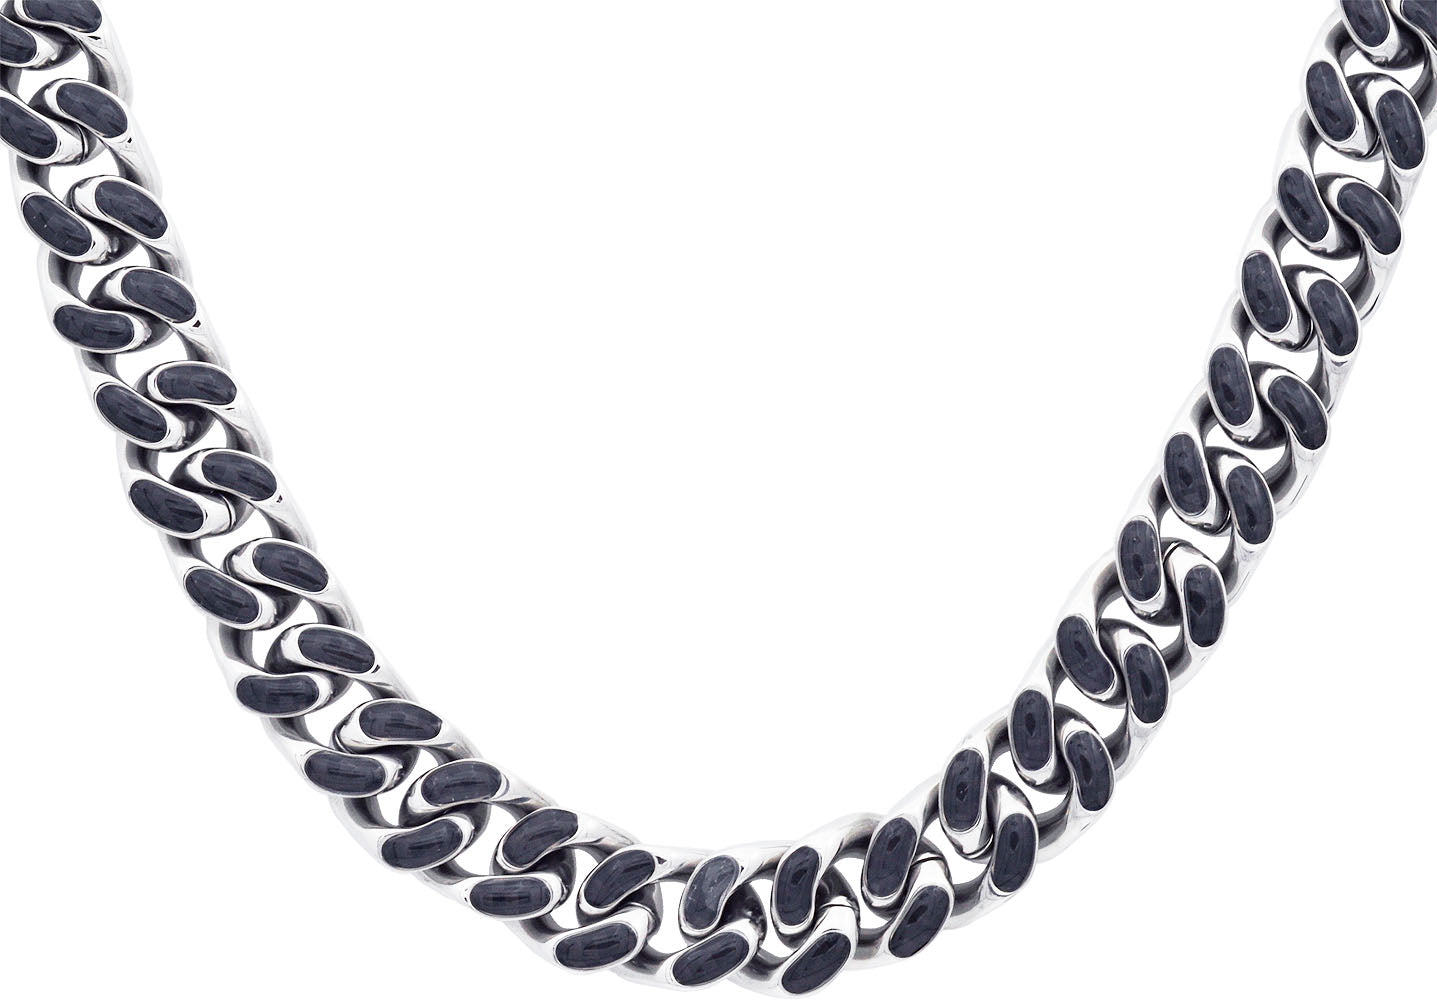 Men's 12mm Stainless Steel Cuban Link Chain Necklace With Carbon Fiber